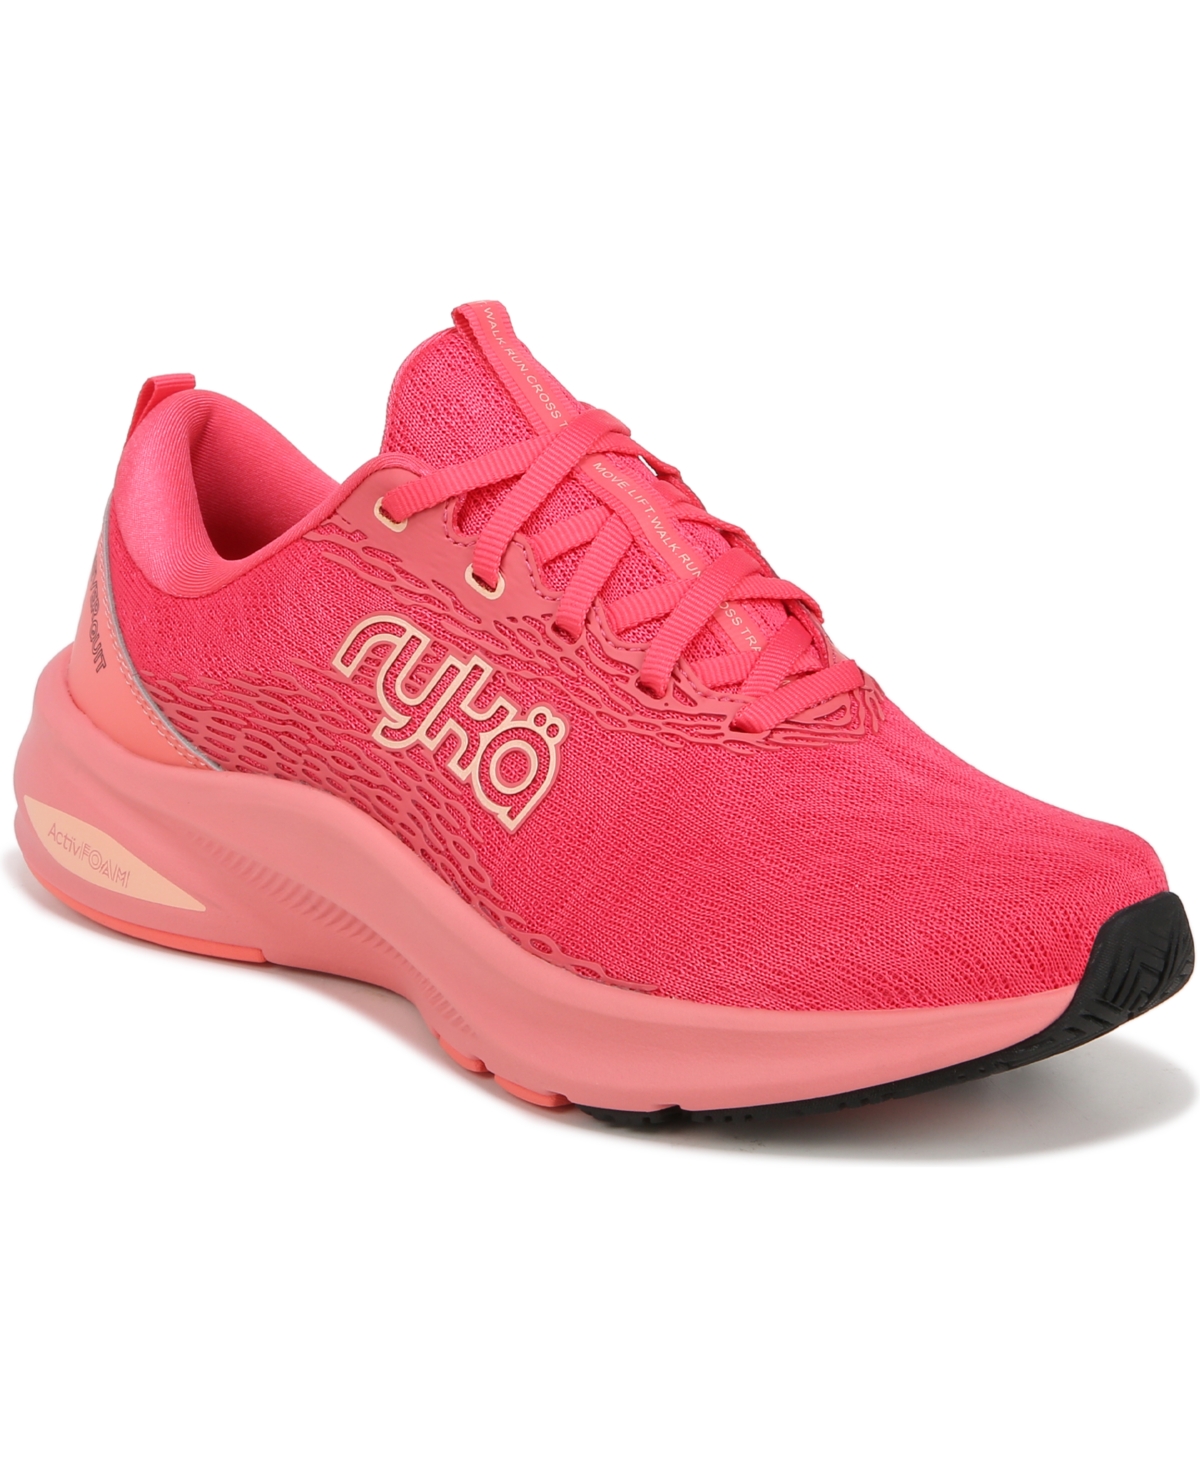 Women's Never Quit Training Sneakers - Paradise Pink Fabric